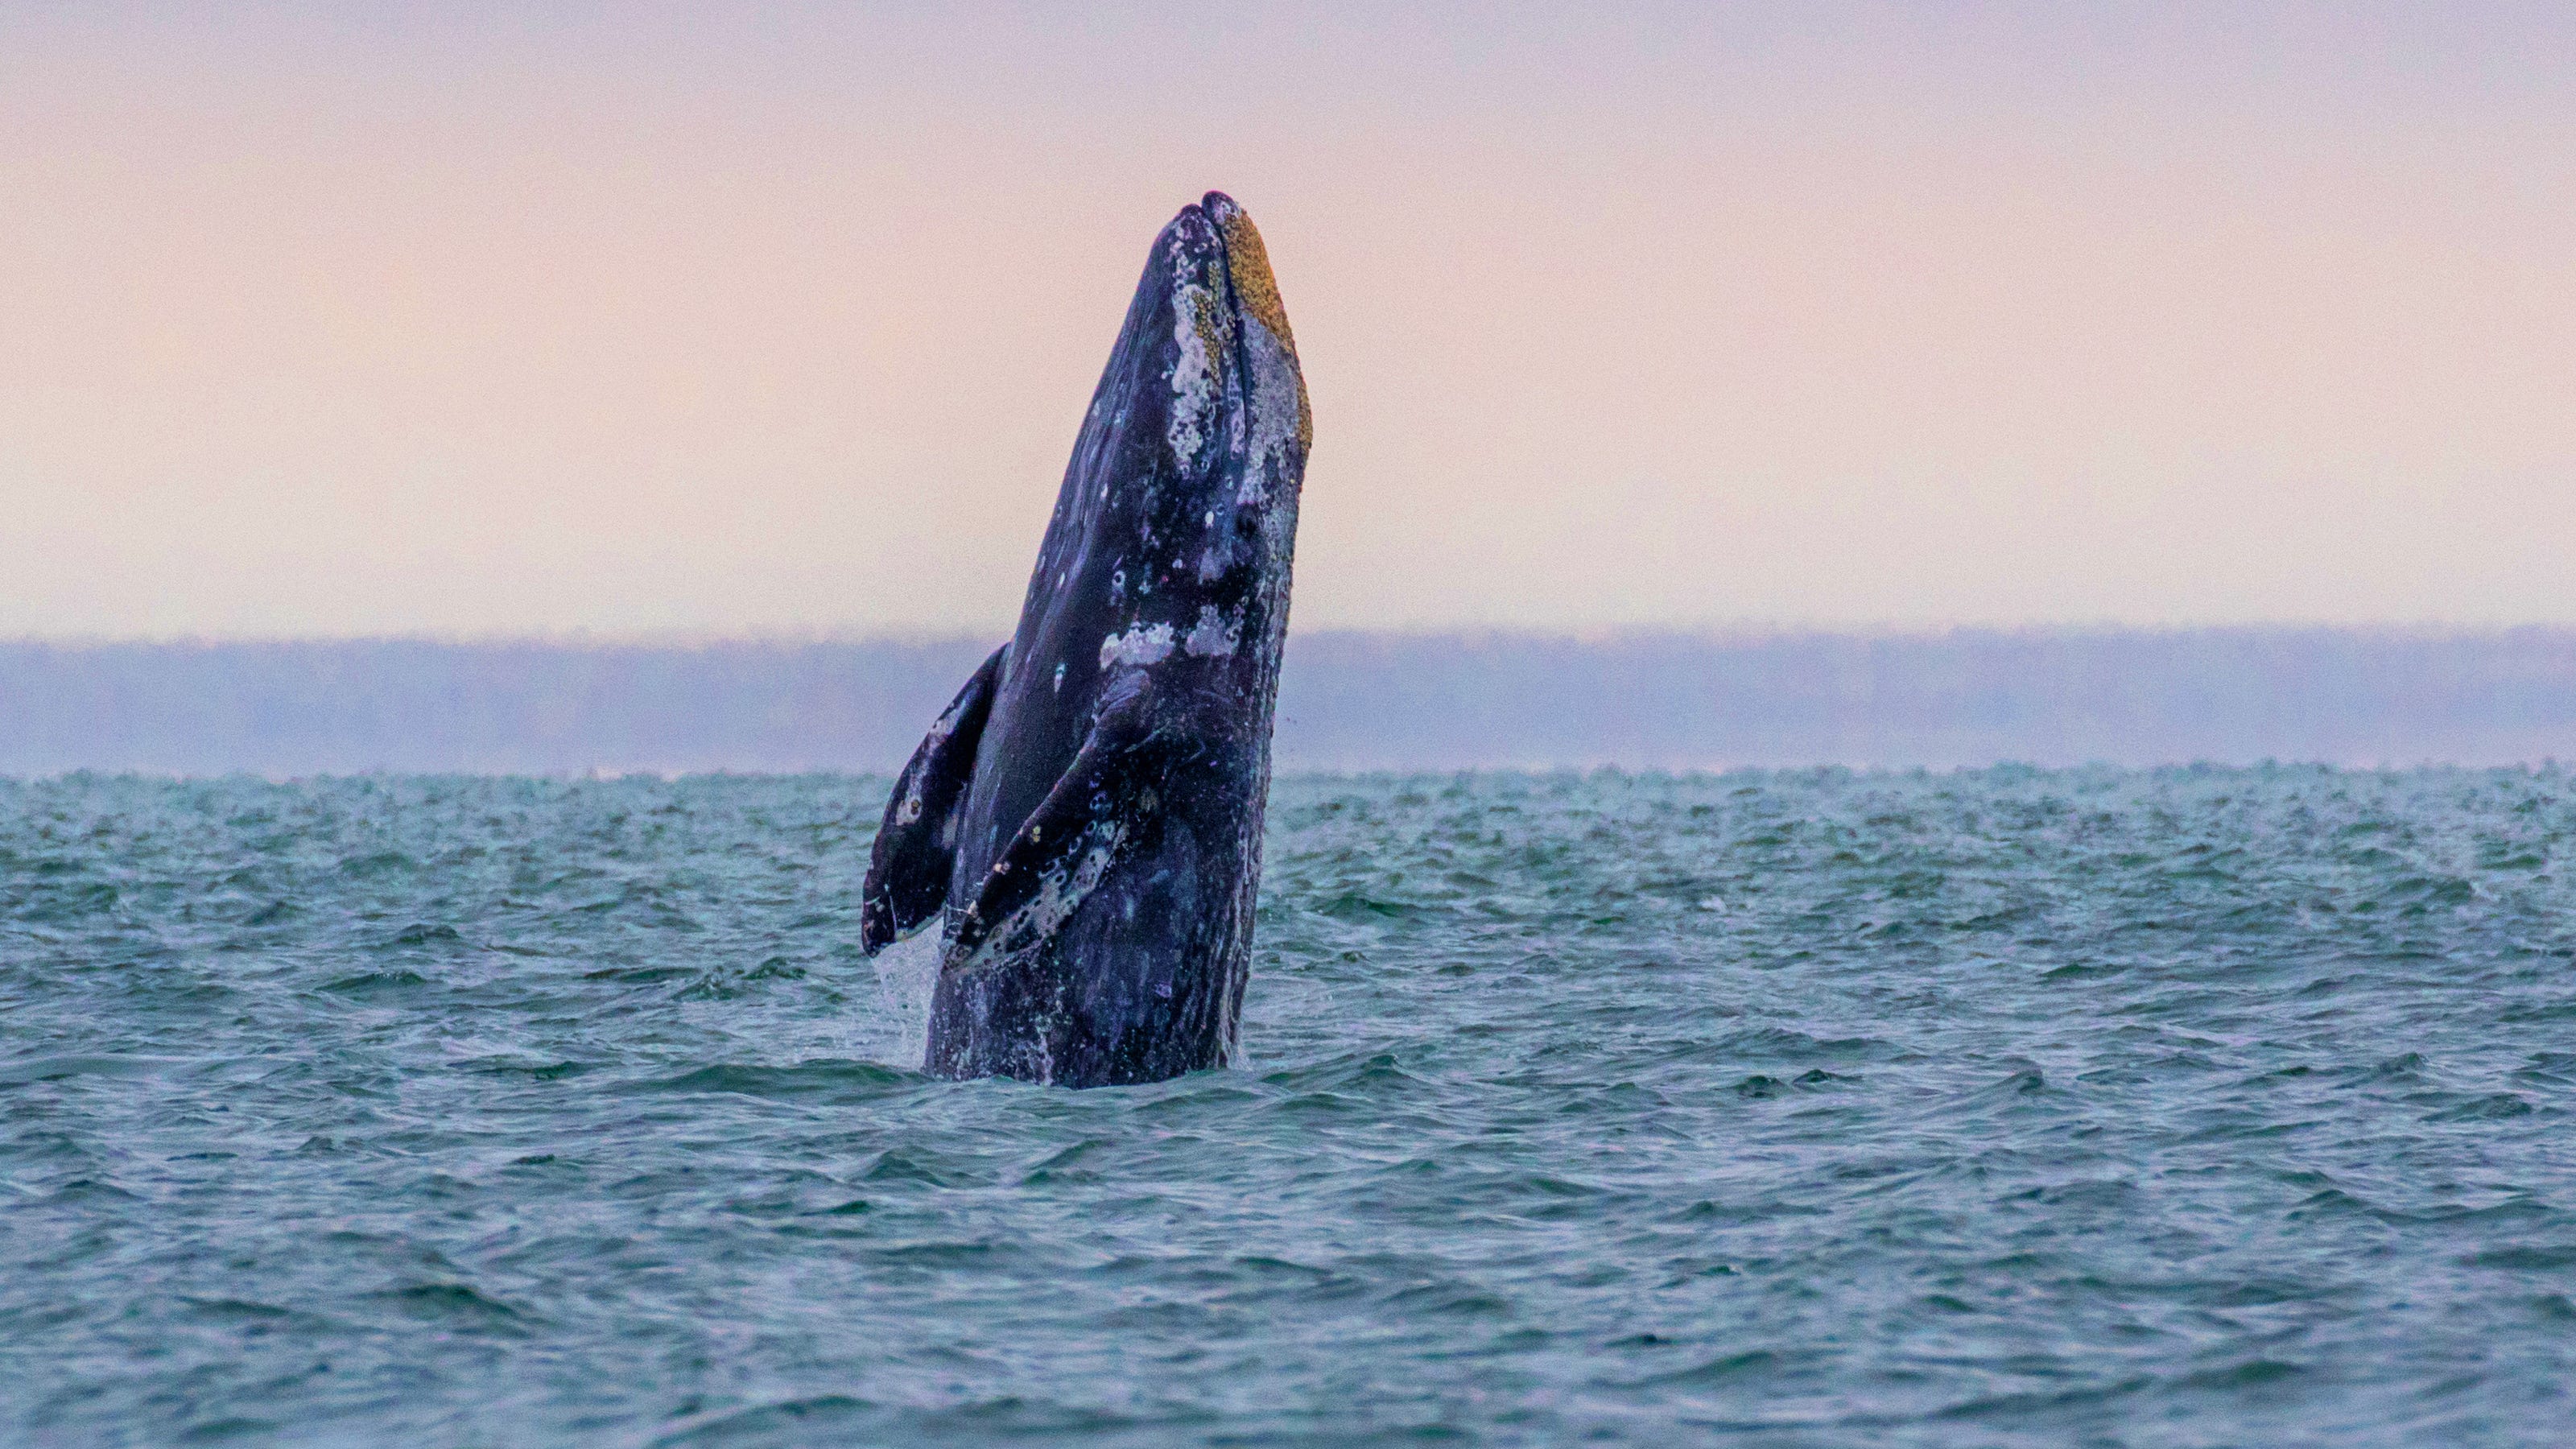 Where can you see Oregon whales so close you can hear them breathe?